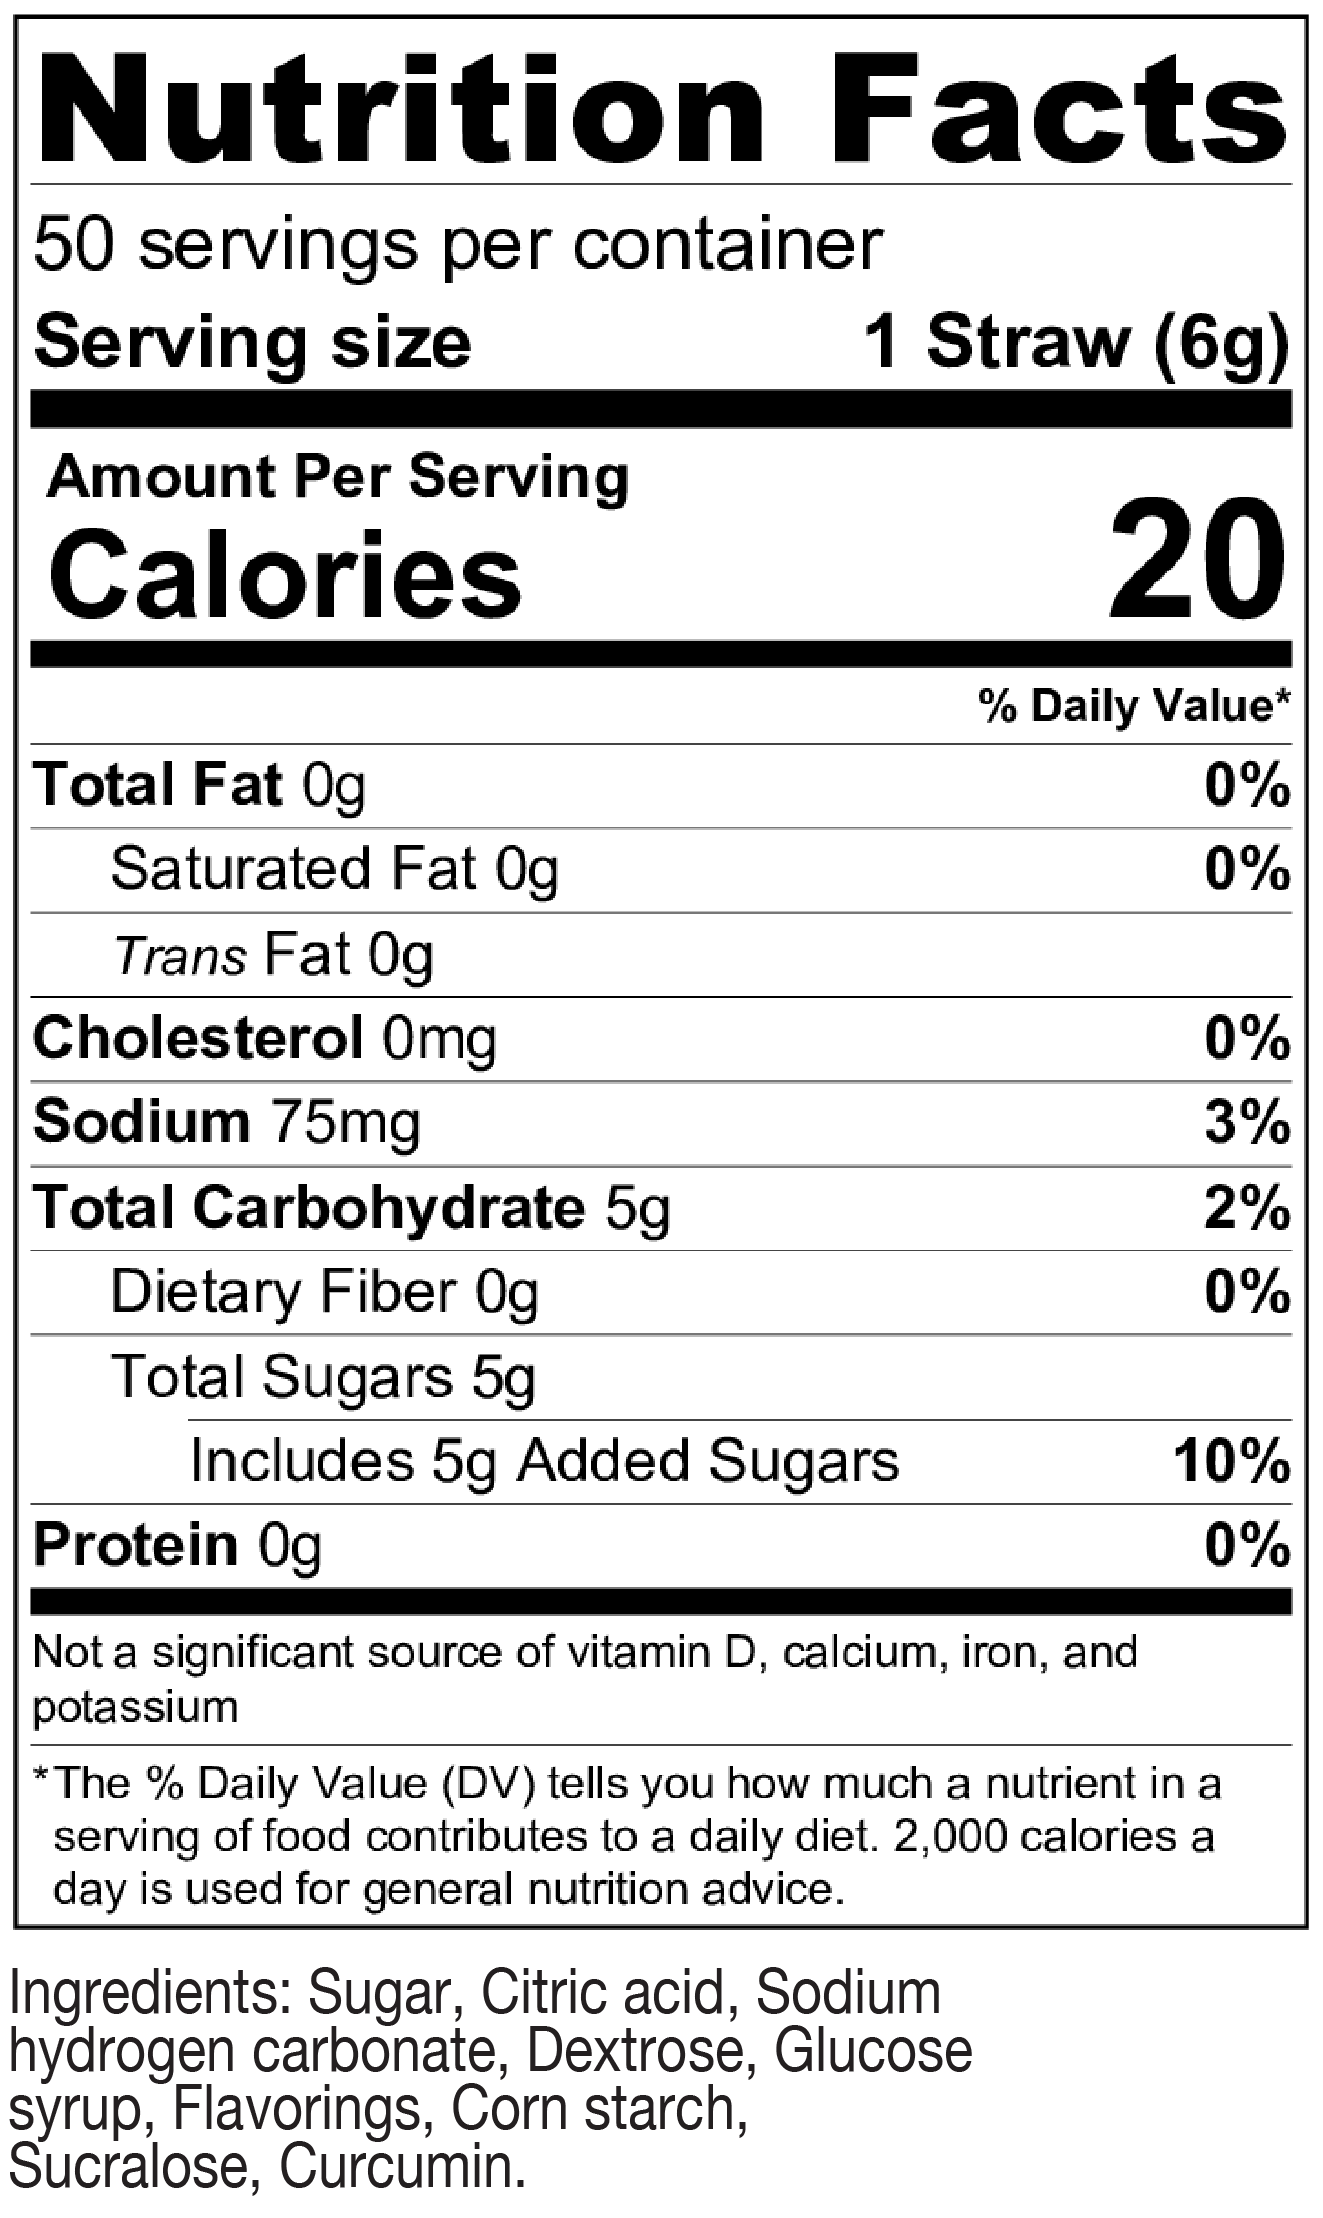 Pina Colada Nutrition Facts.PNG